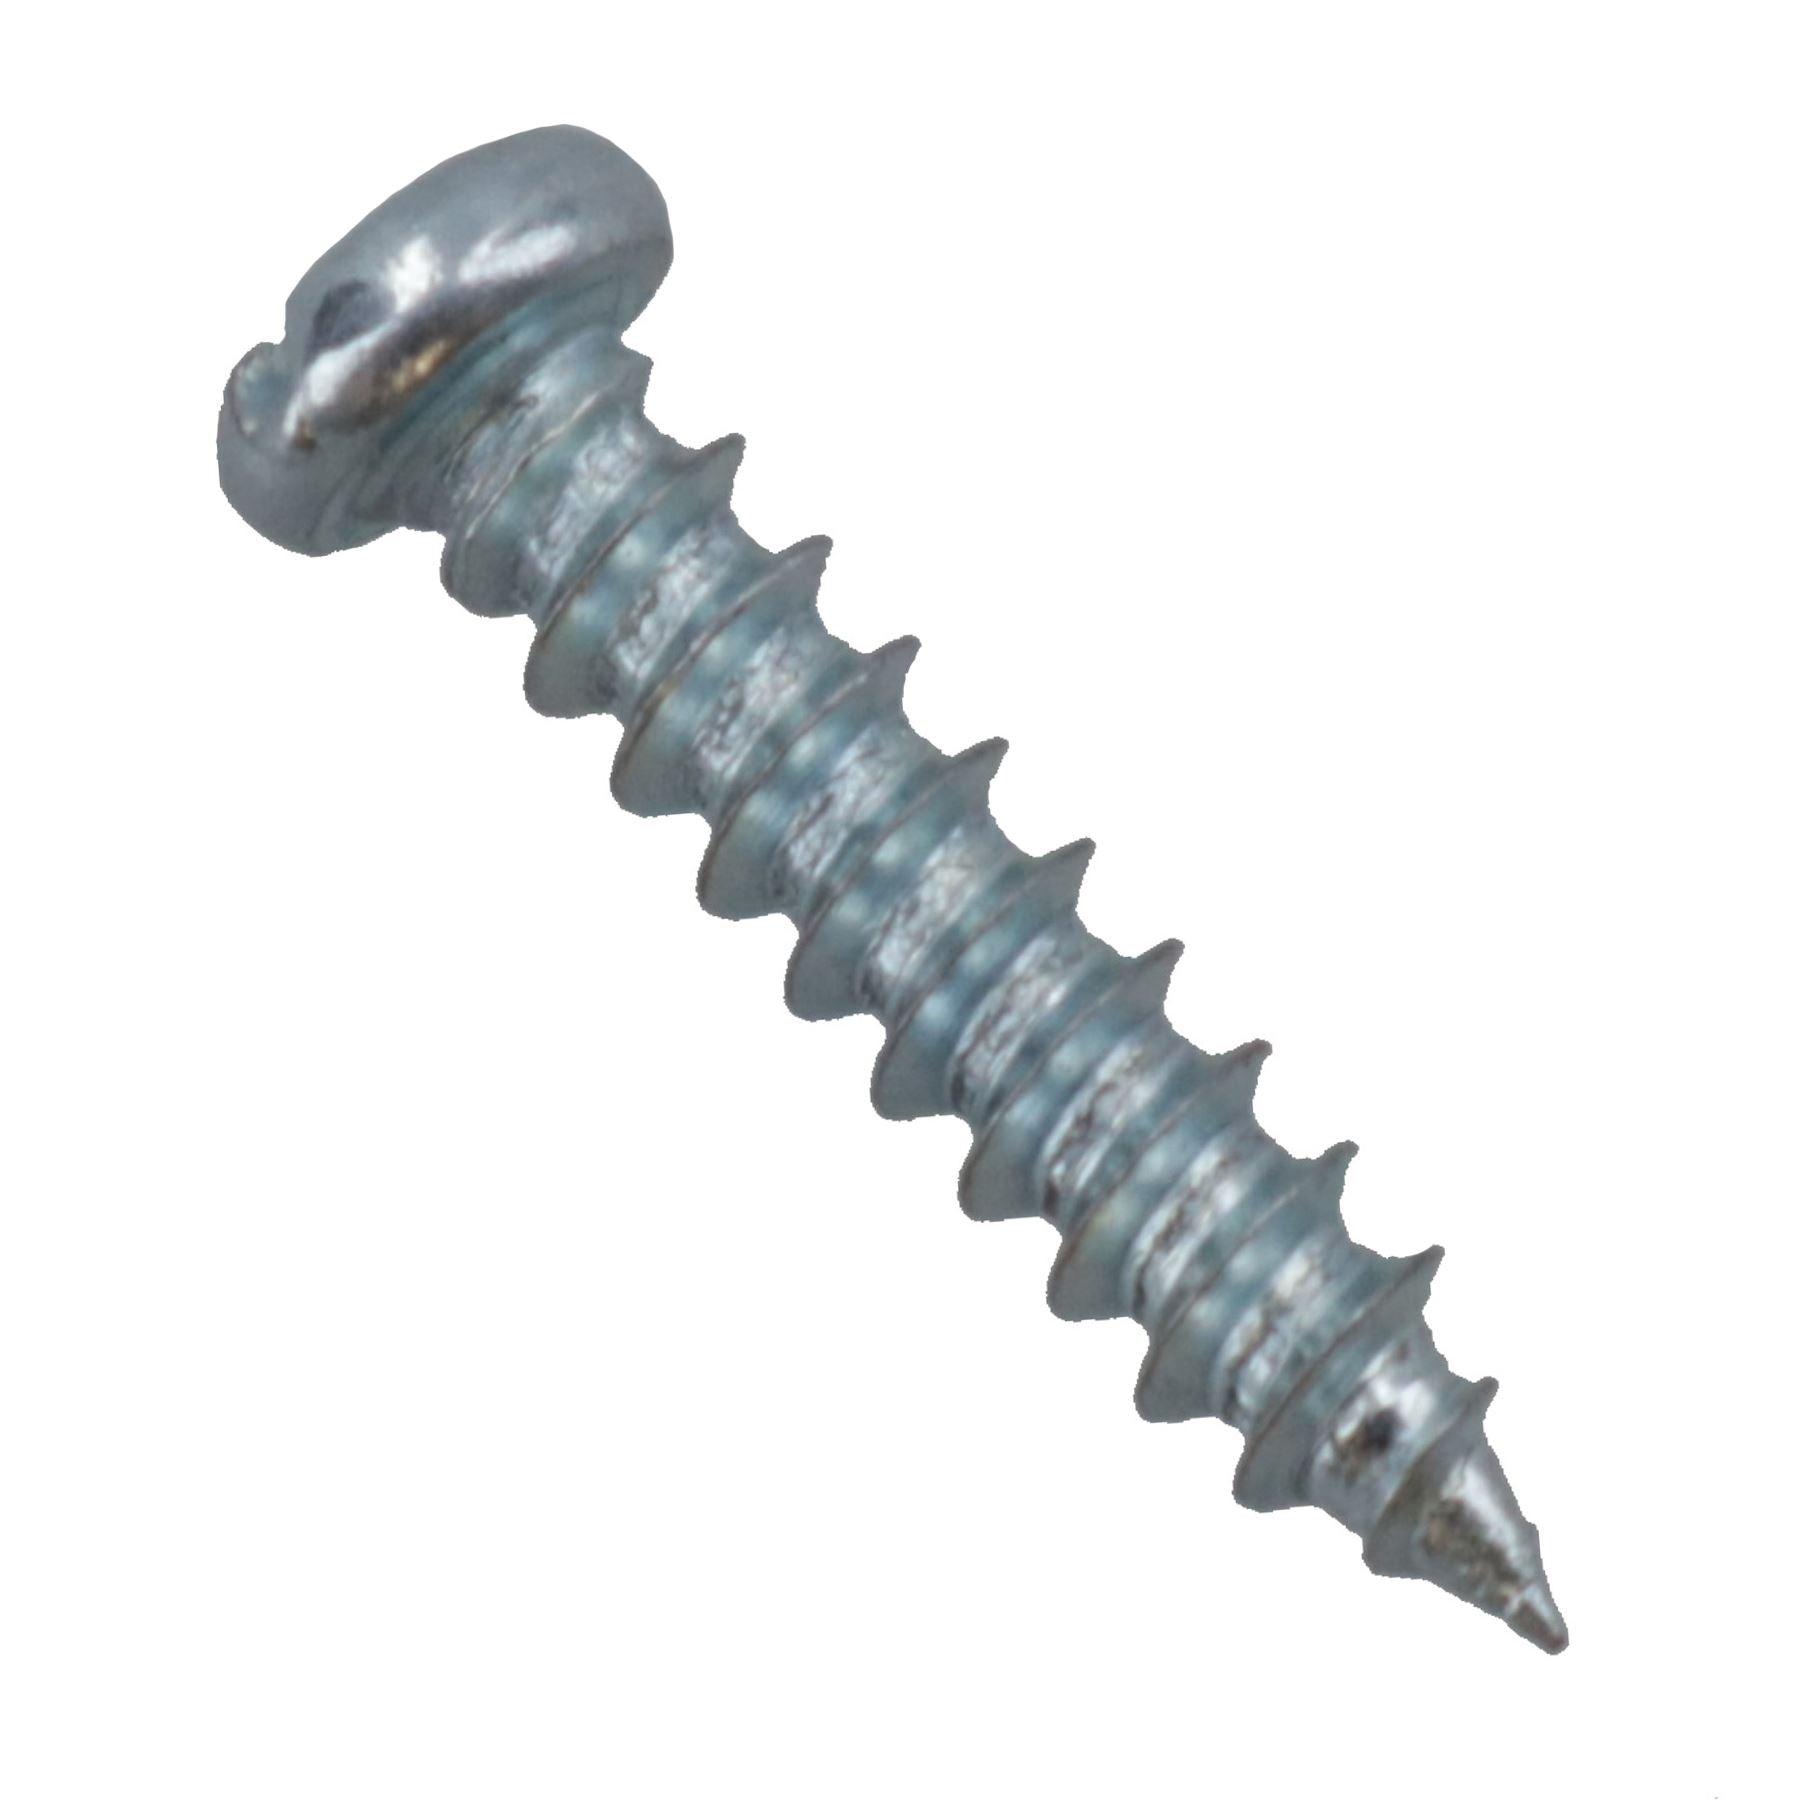 Self Tapping Screws PH2 Drive 4mm (width) x 20mm (length) Fasteners